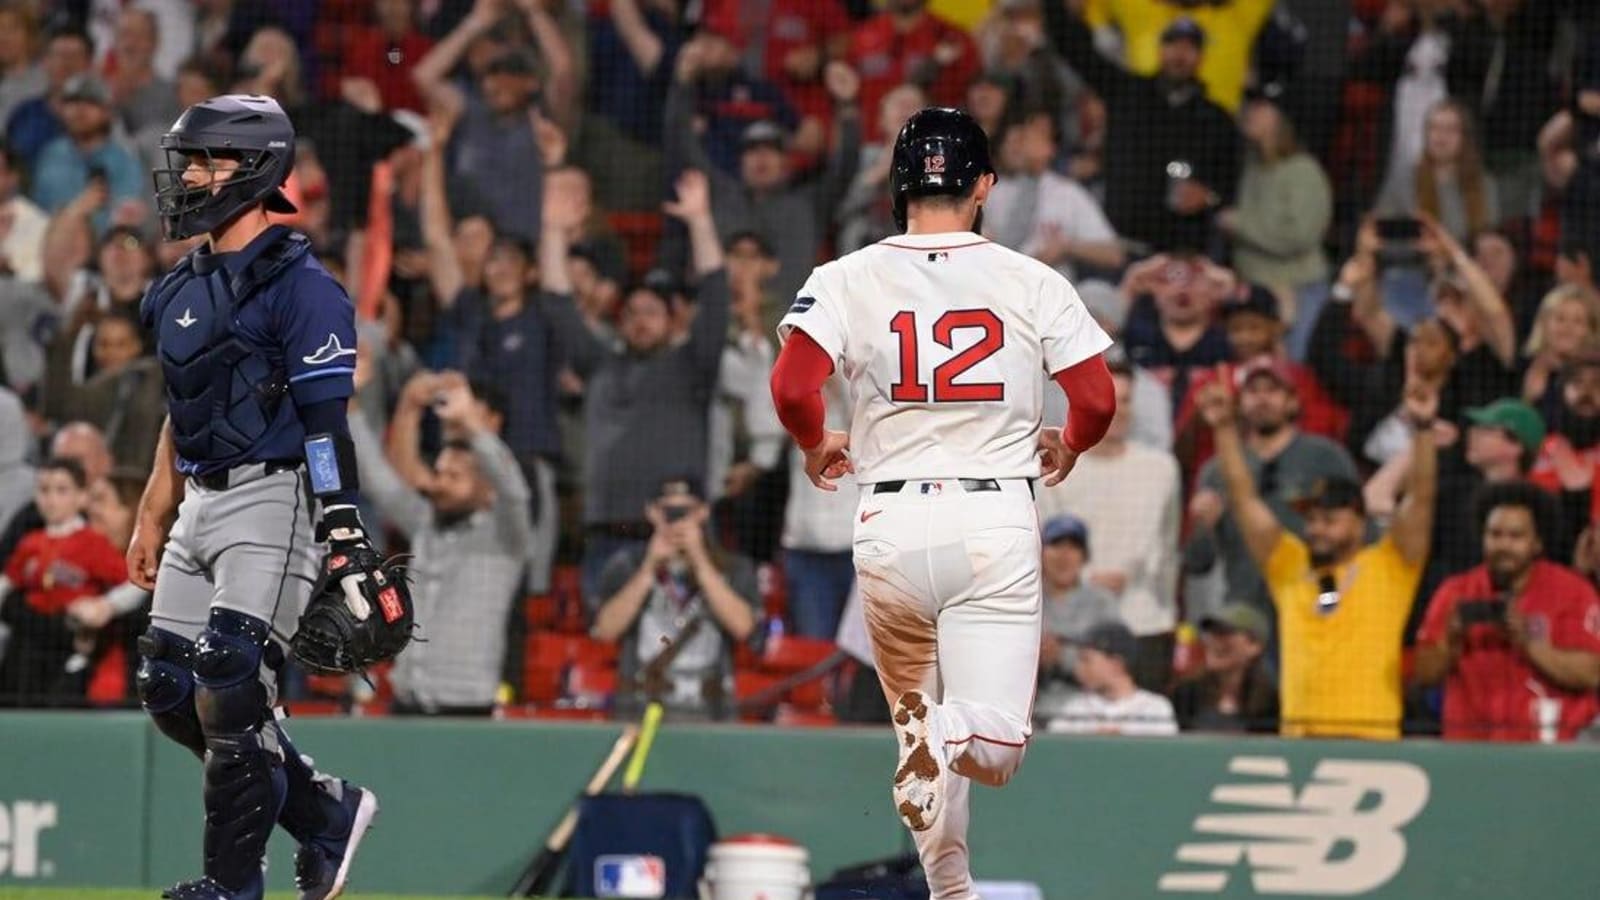 Red Sox, Rays meet again after 12-inning thriller